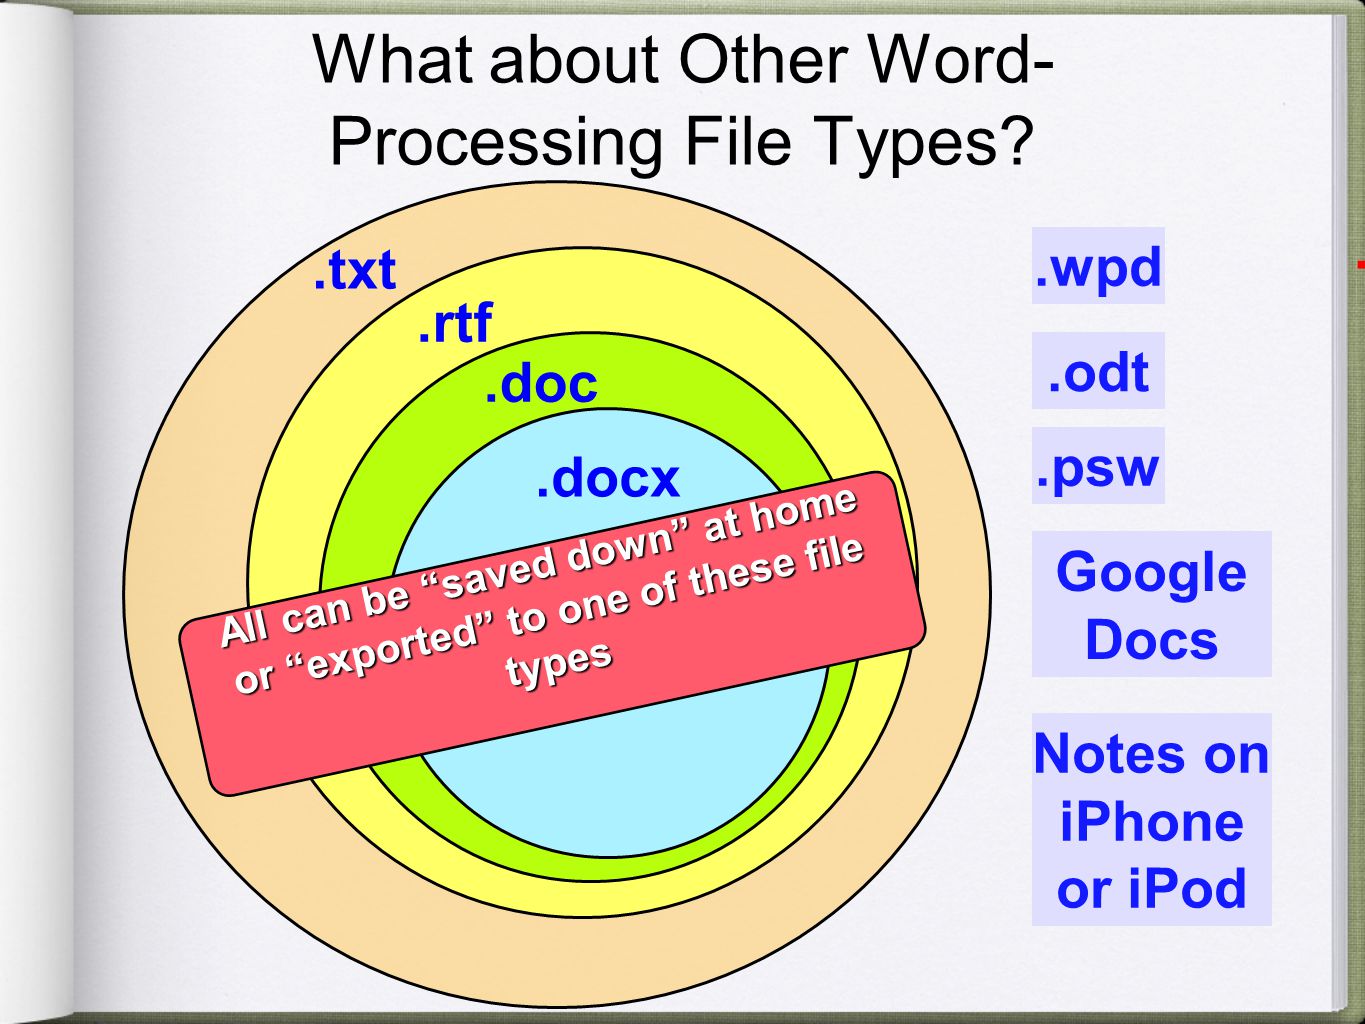 What about Other Word- Processing File Types .txt Sample Apps: Notepad TextEdit Stickies + Opens immediately + Every word processor in the world can read it - No formatting available Rich Text Format + Retains most of the formatting + Most word processors can read - Tables, fonts might be lost Sample Apps: Appleworks Word Perfect All Open Source docs + Microsoft Word for Windows until Microsoft Word for Mac until Nothing stays static!.txt.rtf.doc.docx.wpd.odt.psw Google Docs Notes on iPhone or iPod All can be saved down at home or exported to one of these file types